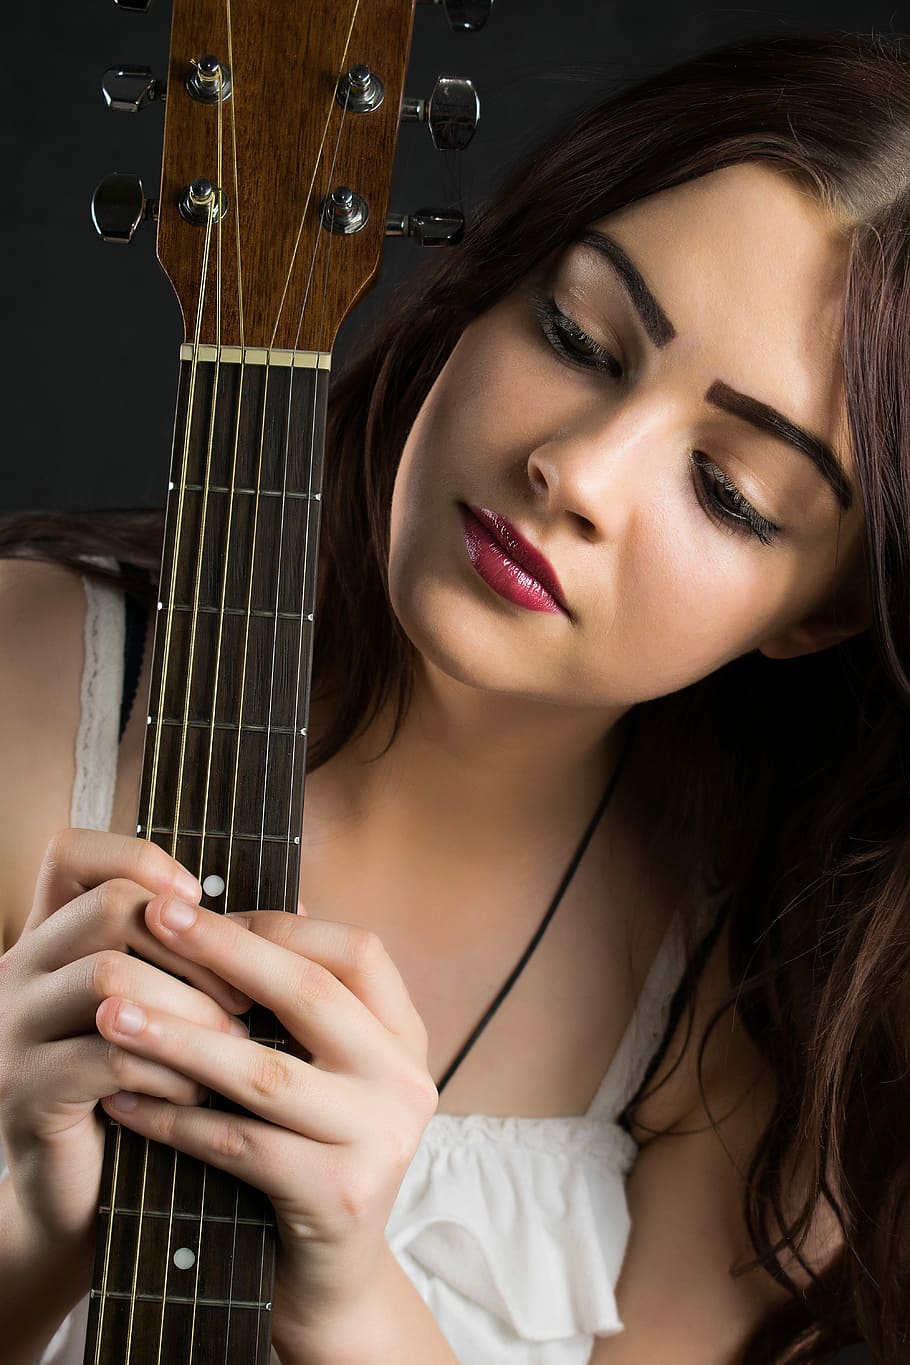 woman, staring, black, guitar neck, holding, hands, beautiful, young, fashion, pretty